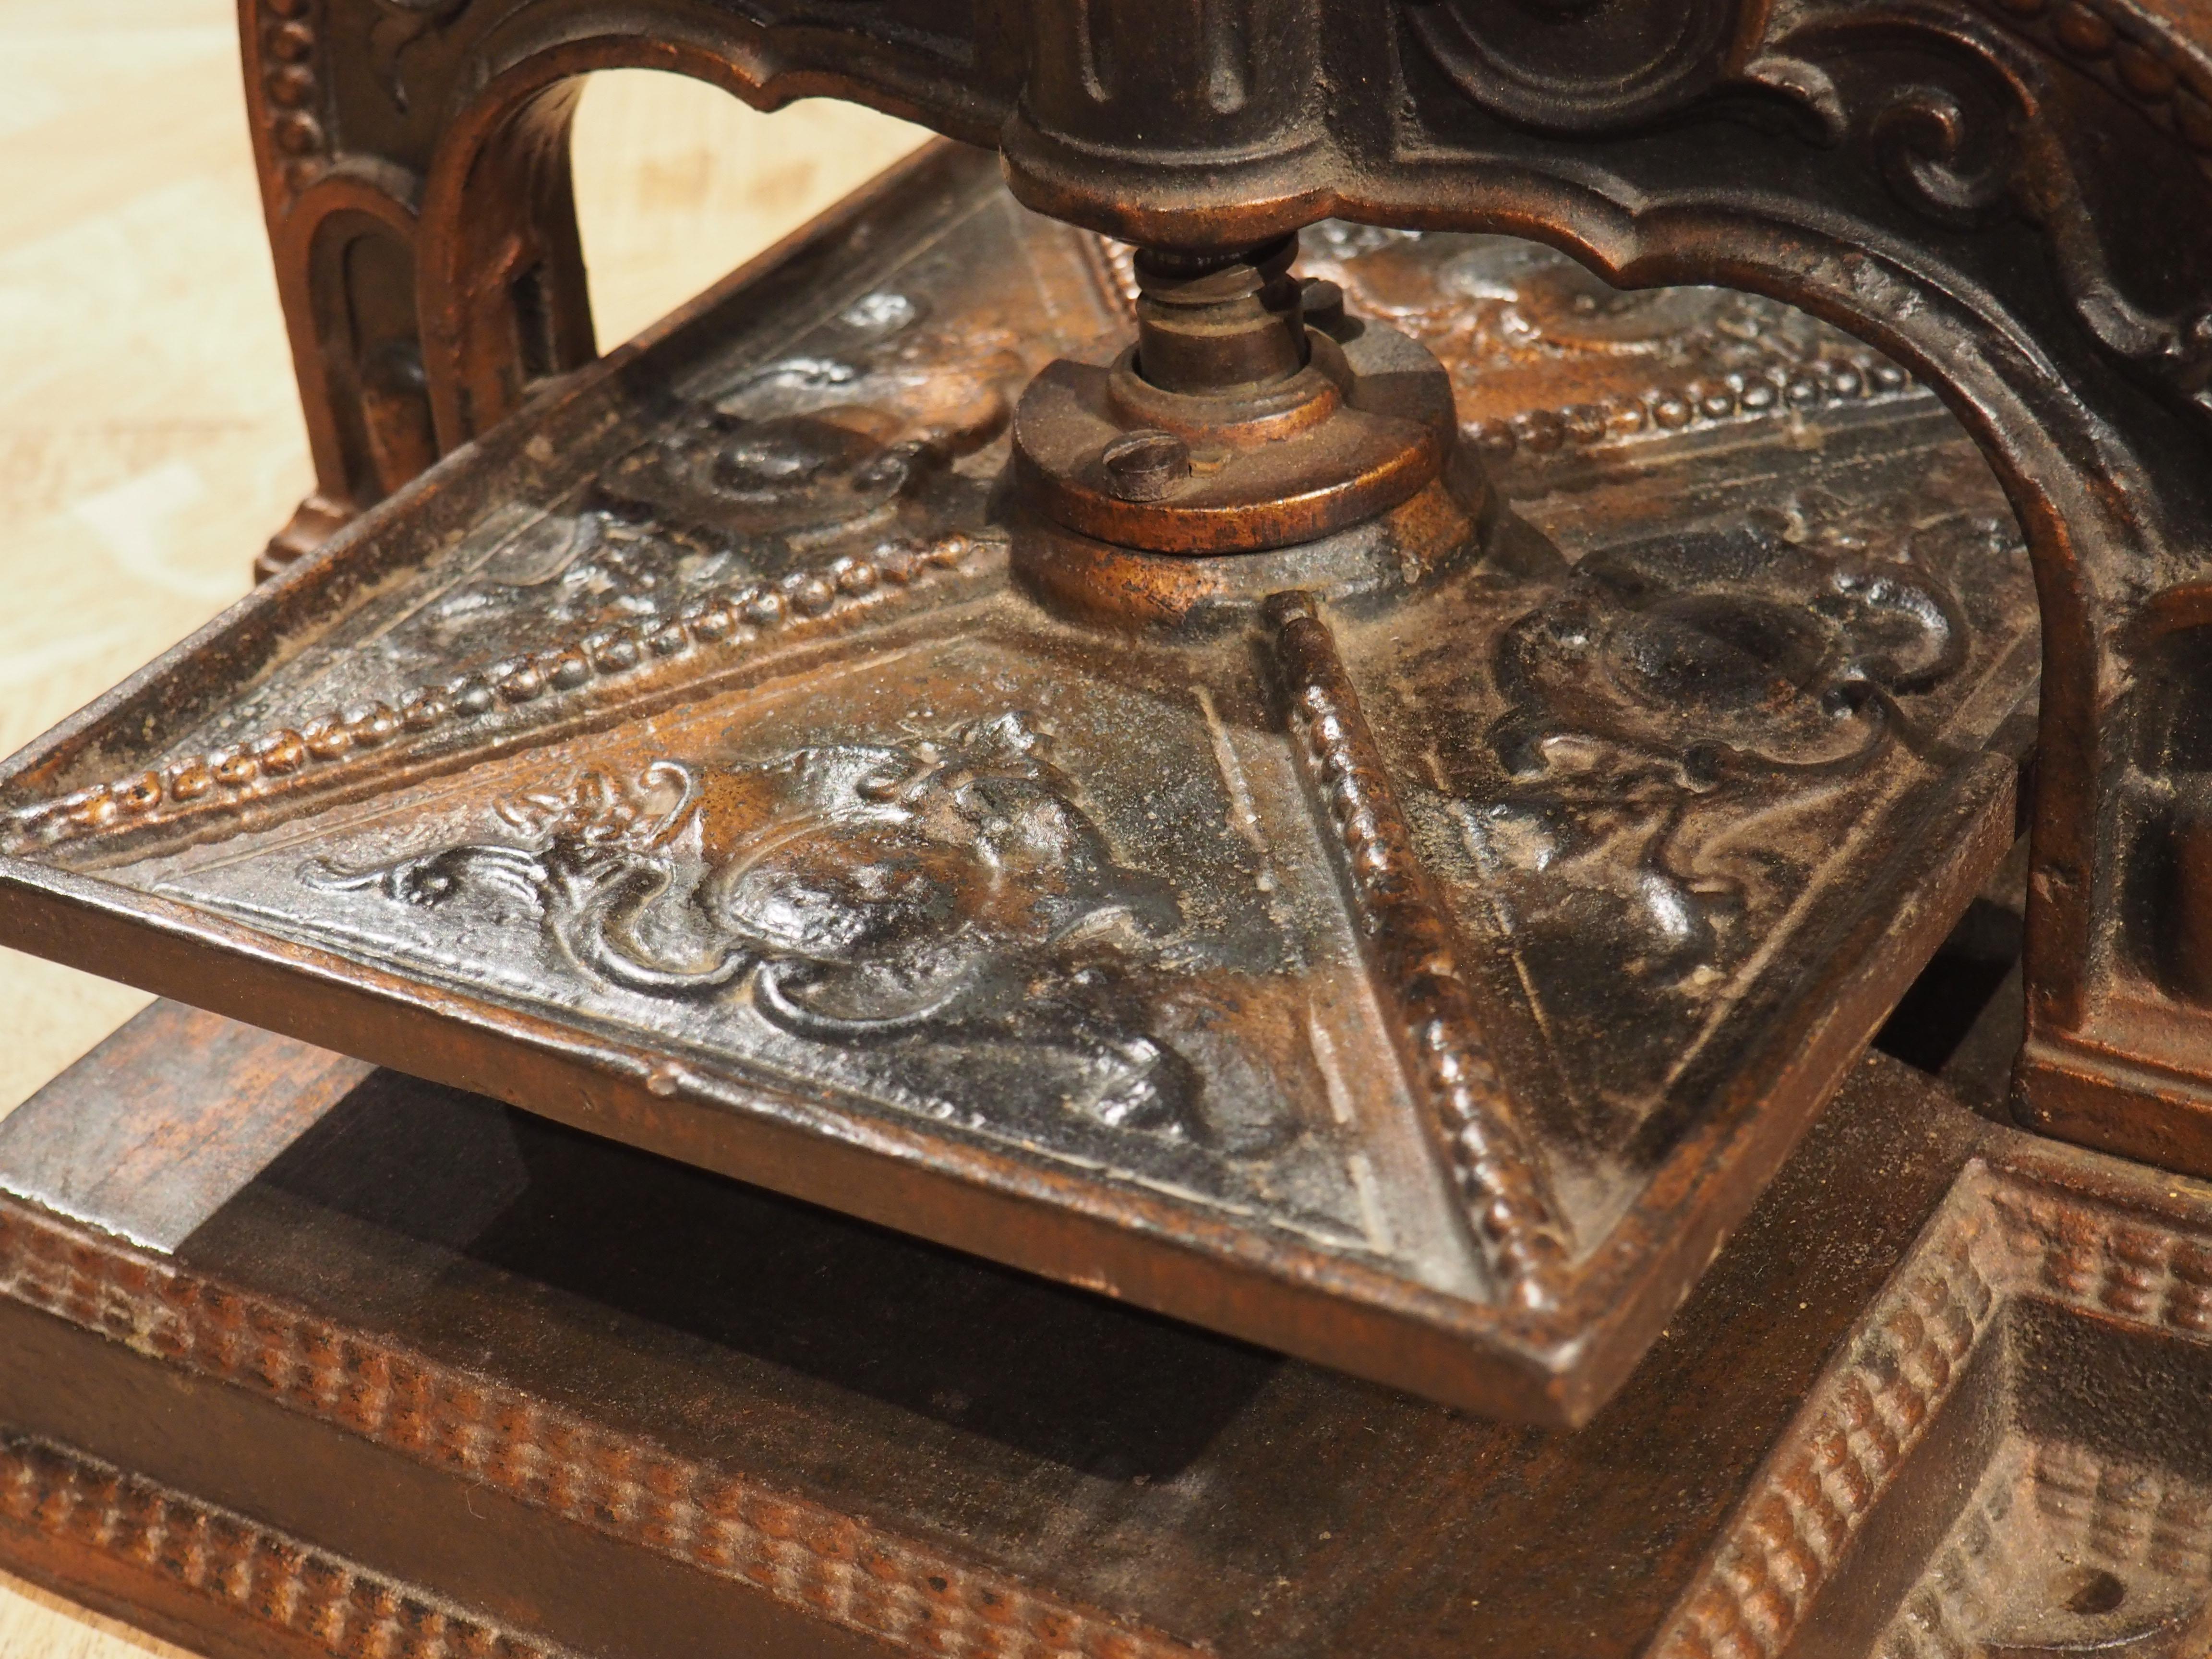 This cast iron piece, known as a book press, was originally used in banks or libraries used to bind documents and books with significant force. This model, from France, dates to the turn of the last century, and it is adorned with interesting